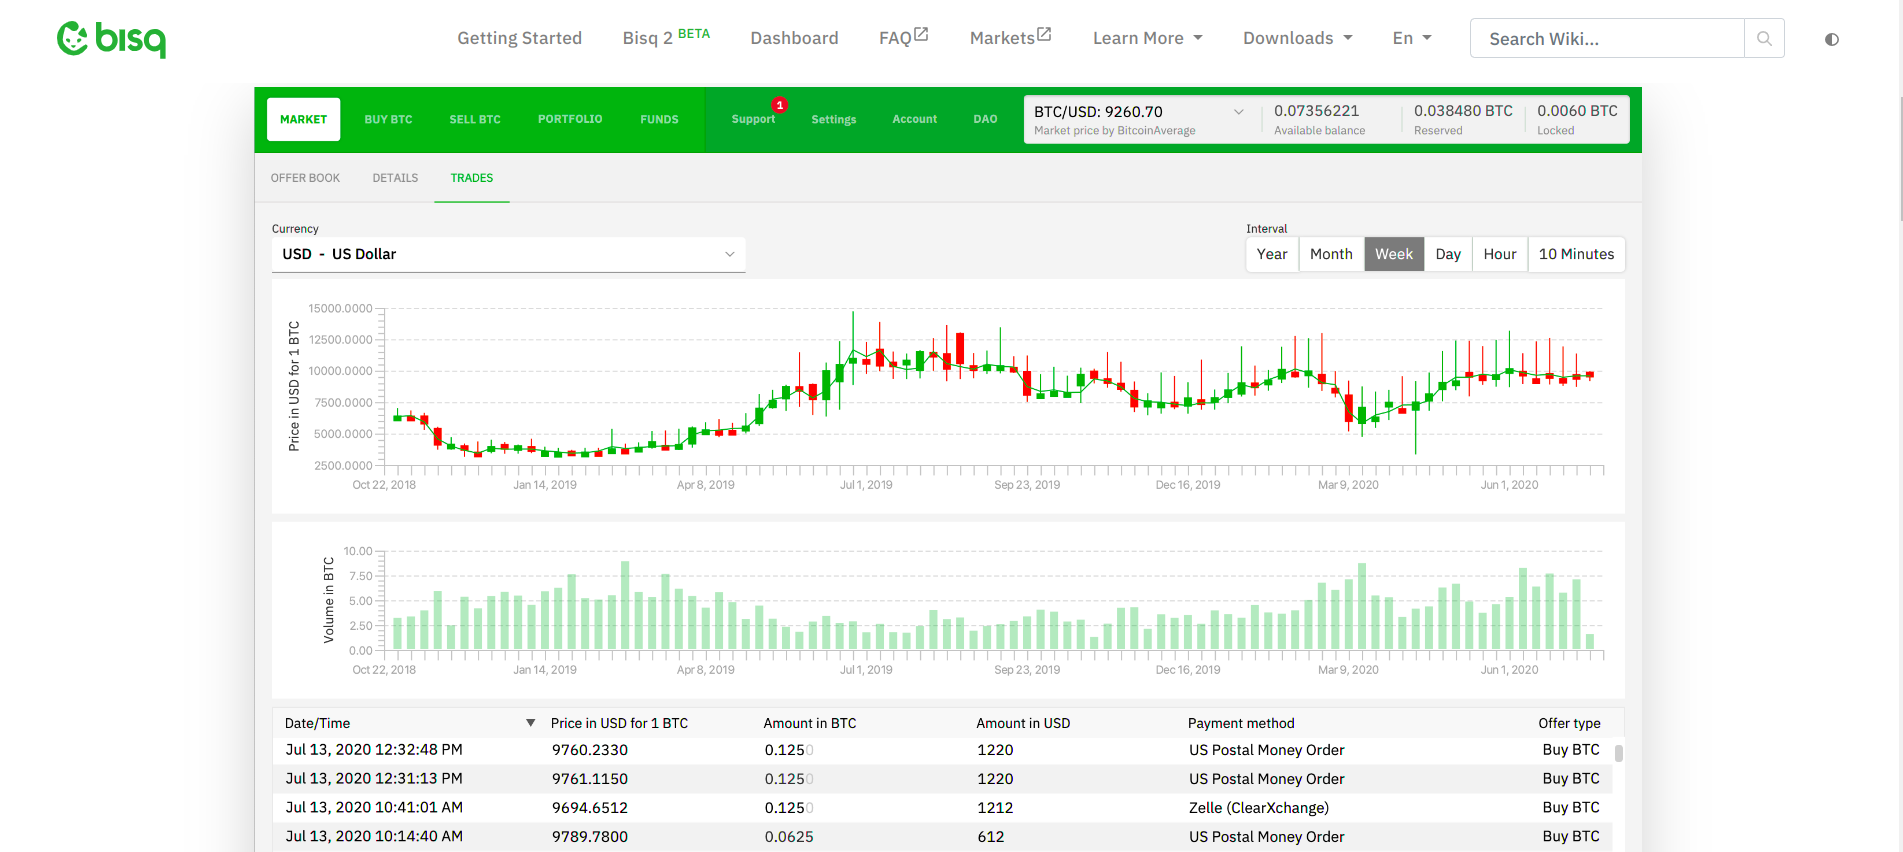 bisq buy cryptocurrency p2p